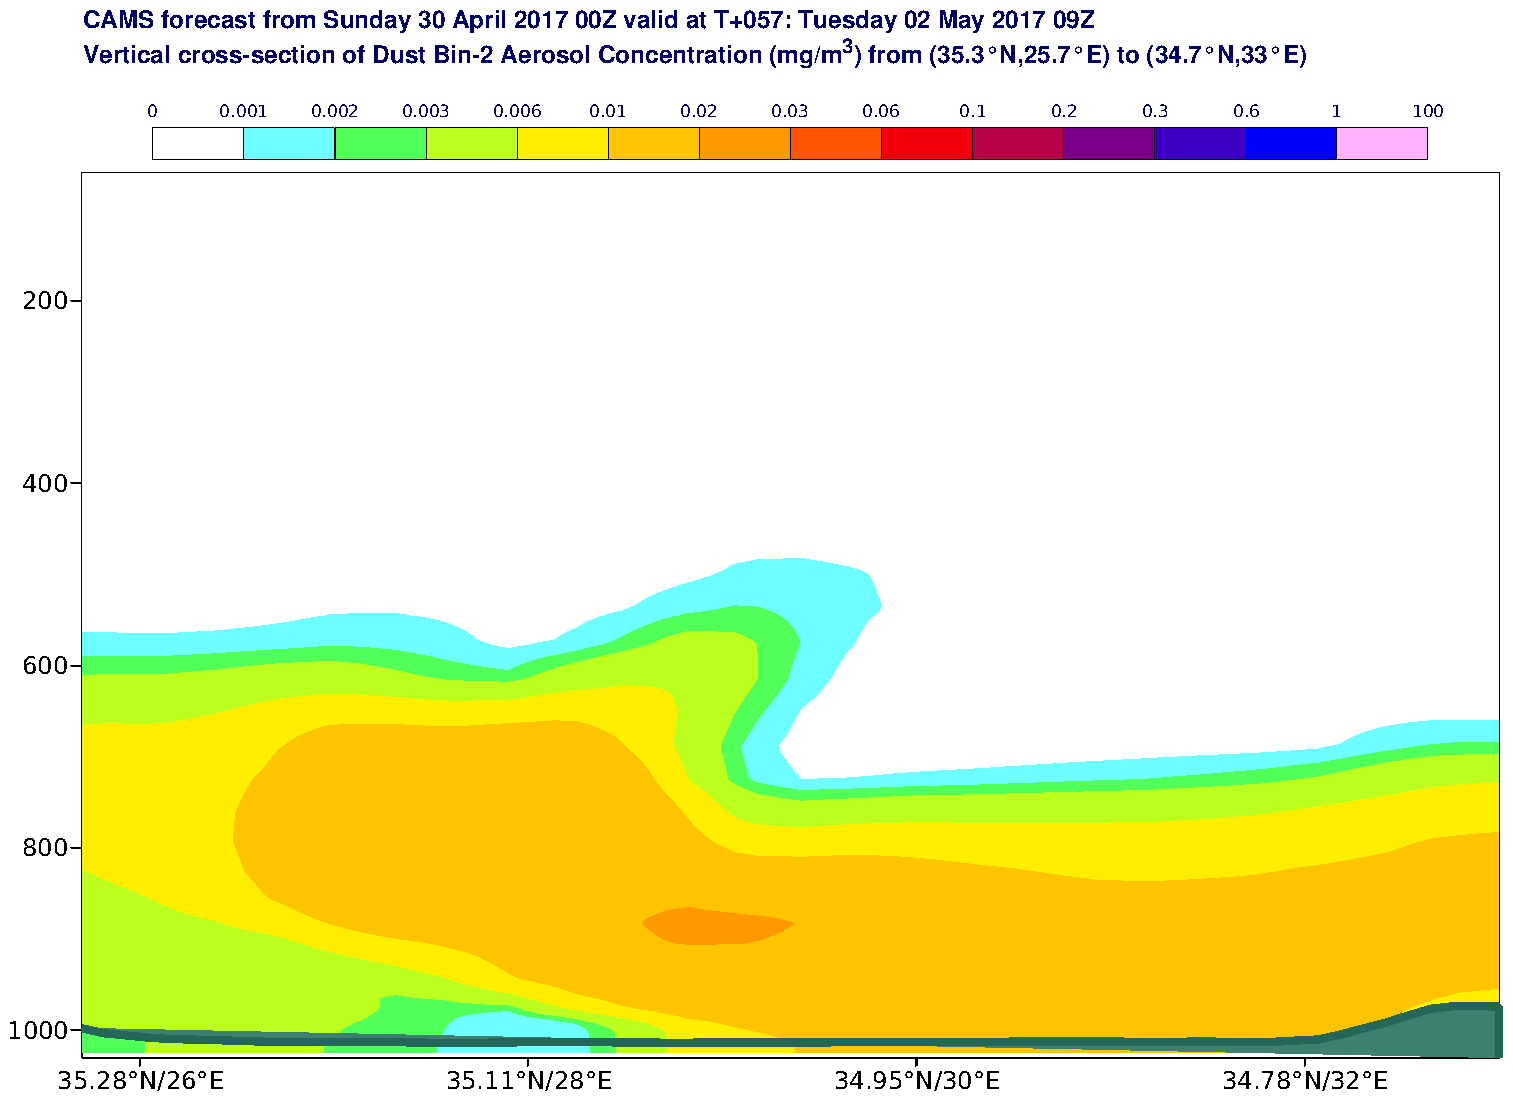 Vertical cross-section of Dust Bin-2 Aerosol Concentration (mg/m3) valid at T57 - 2017-05-02 09:00